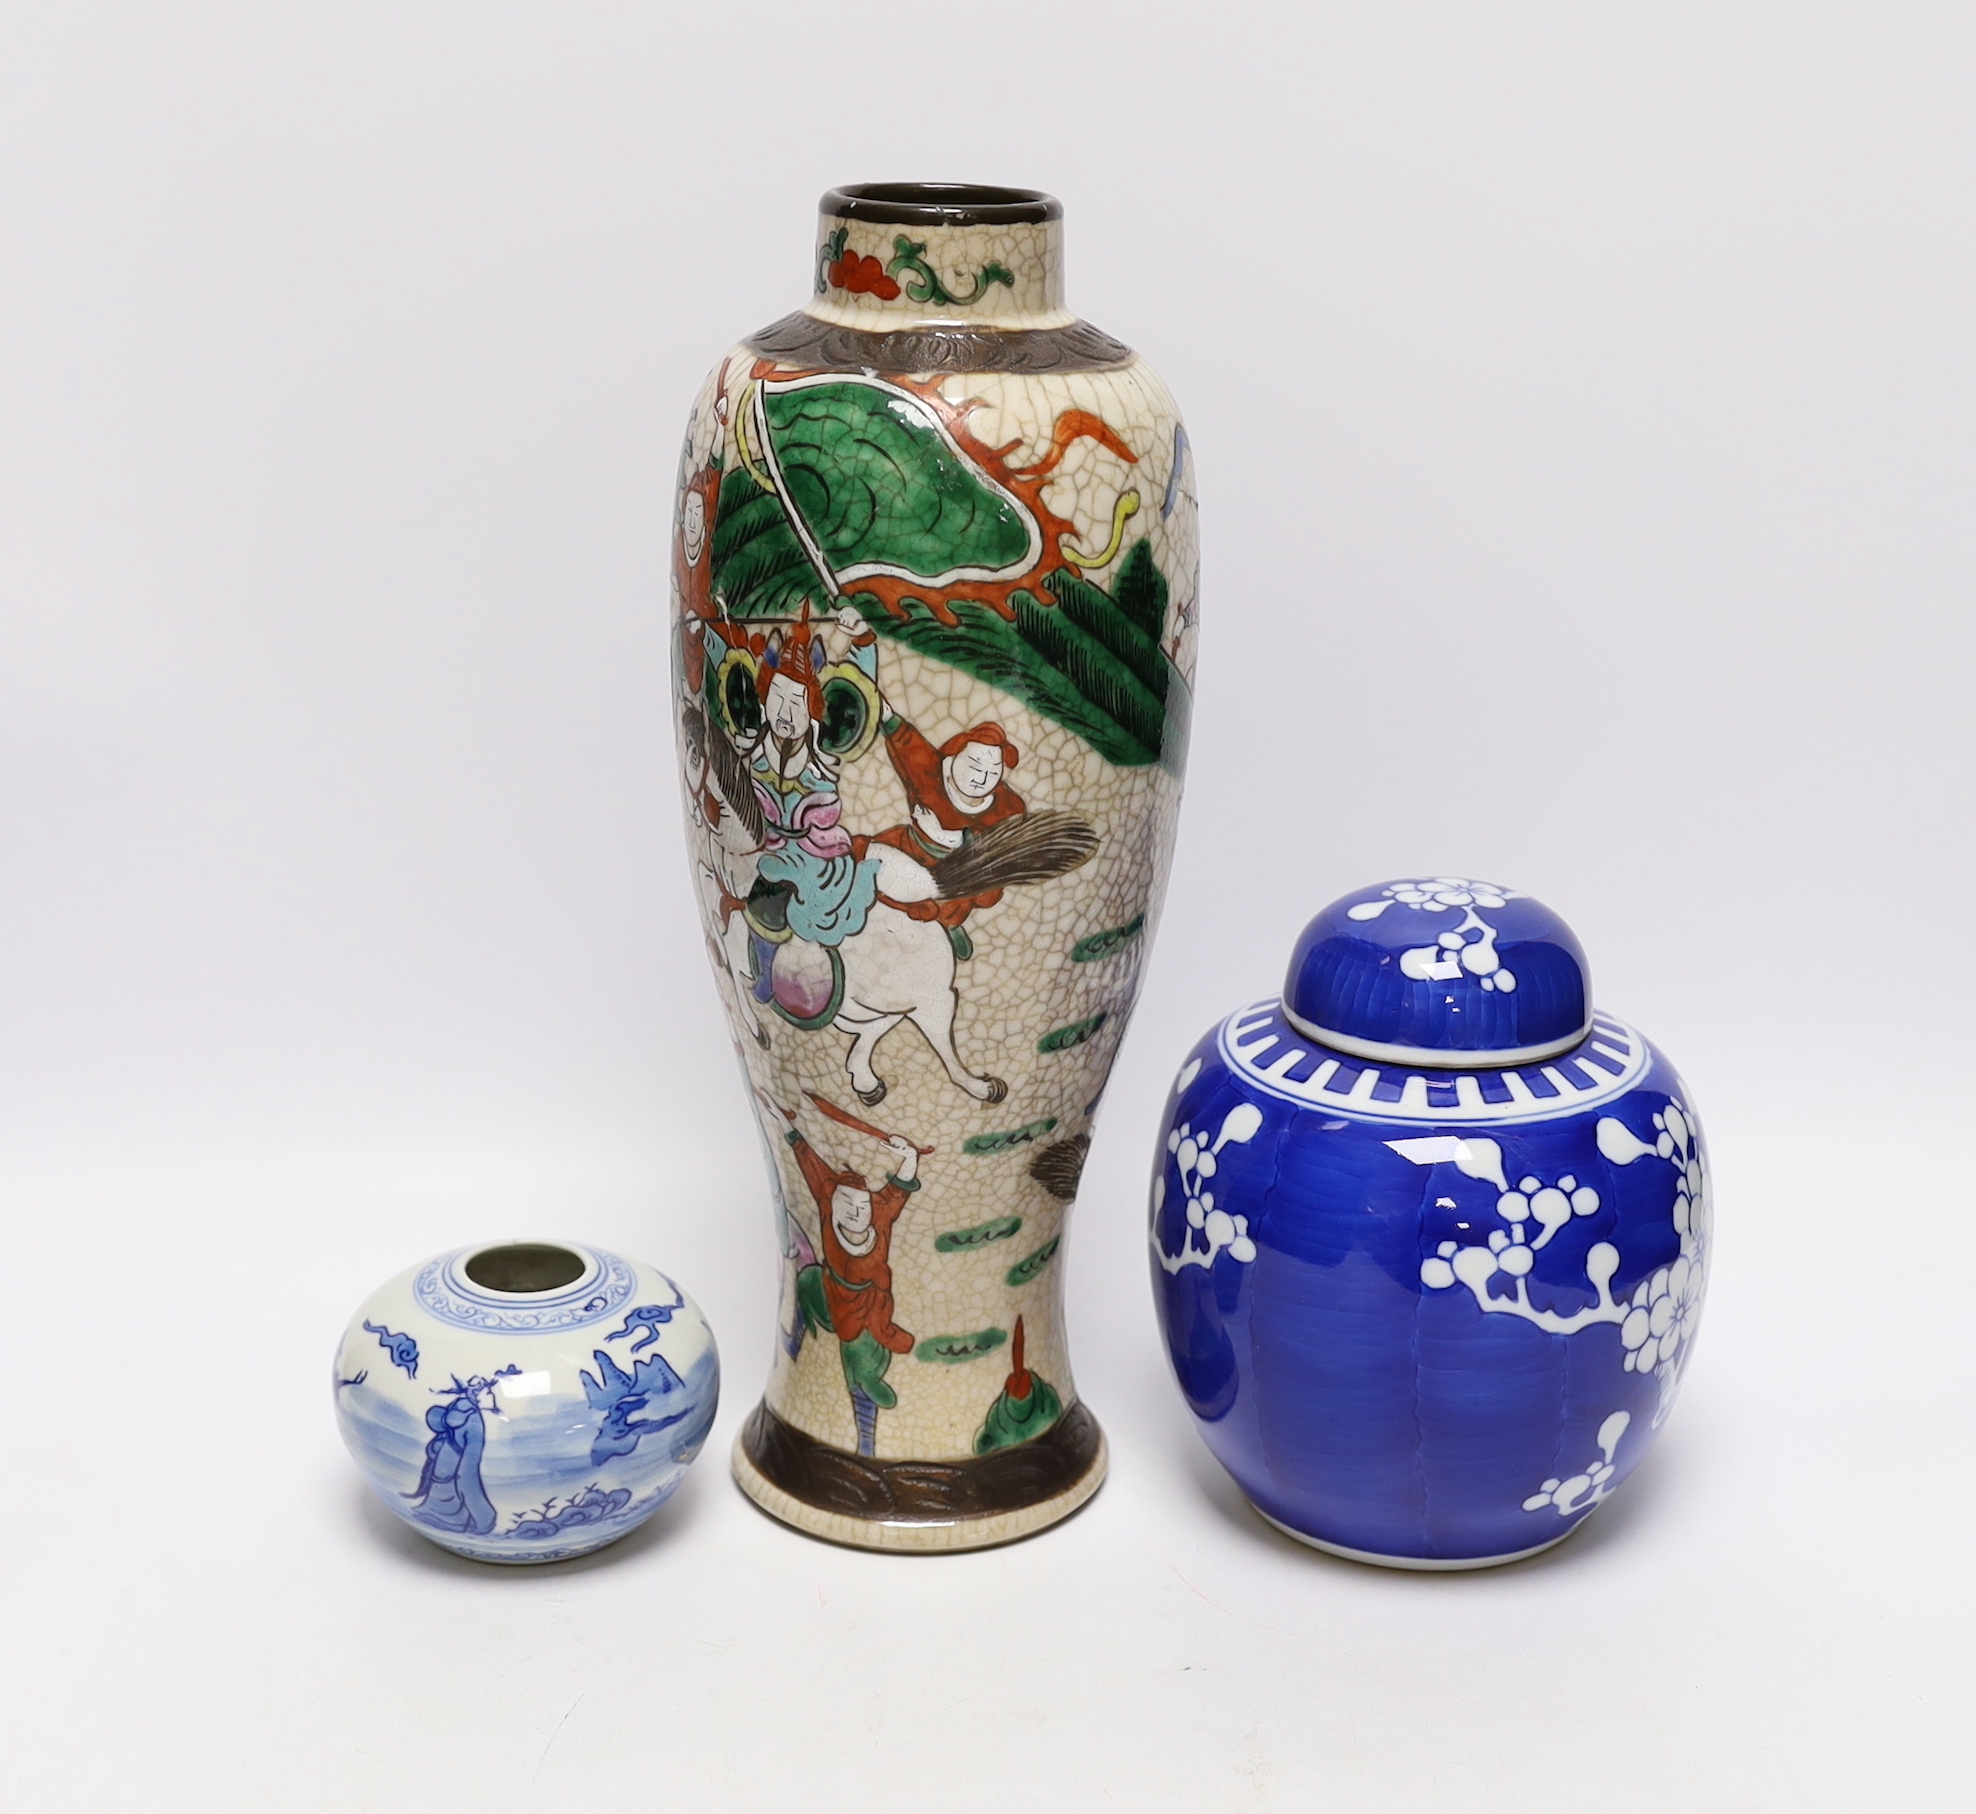 An early 20th century Chinese crackle glaze vase and two blue and white jars, largest 30cm high